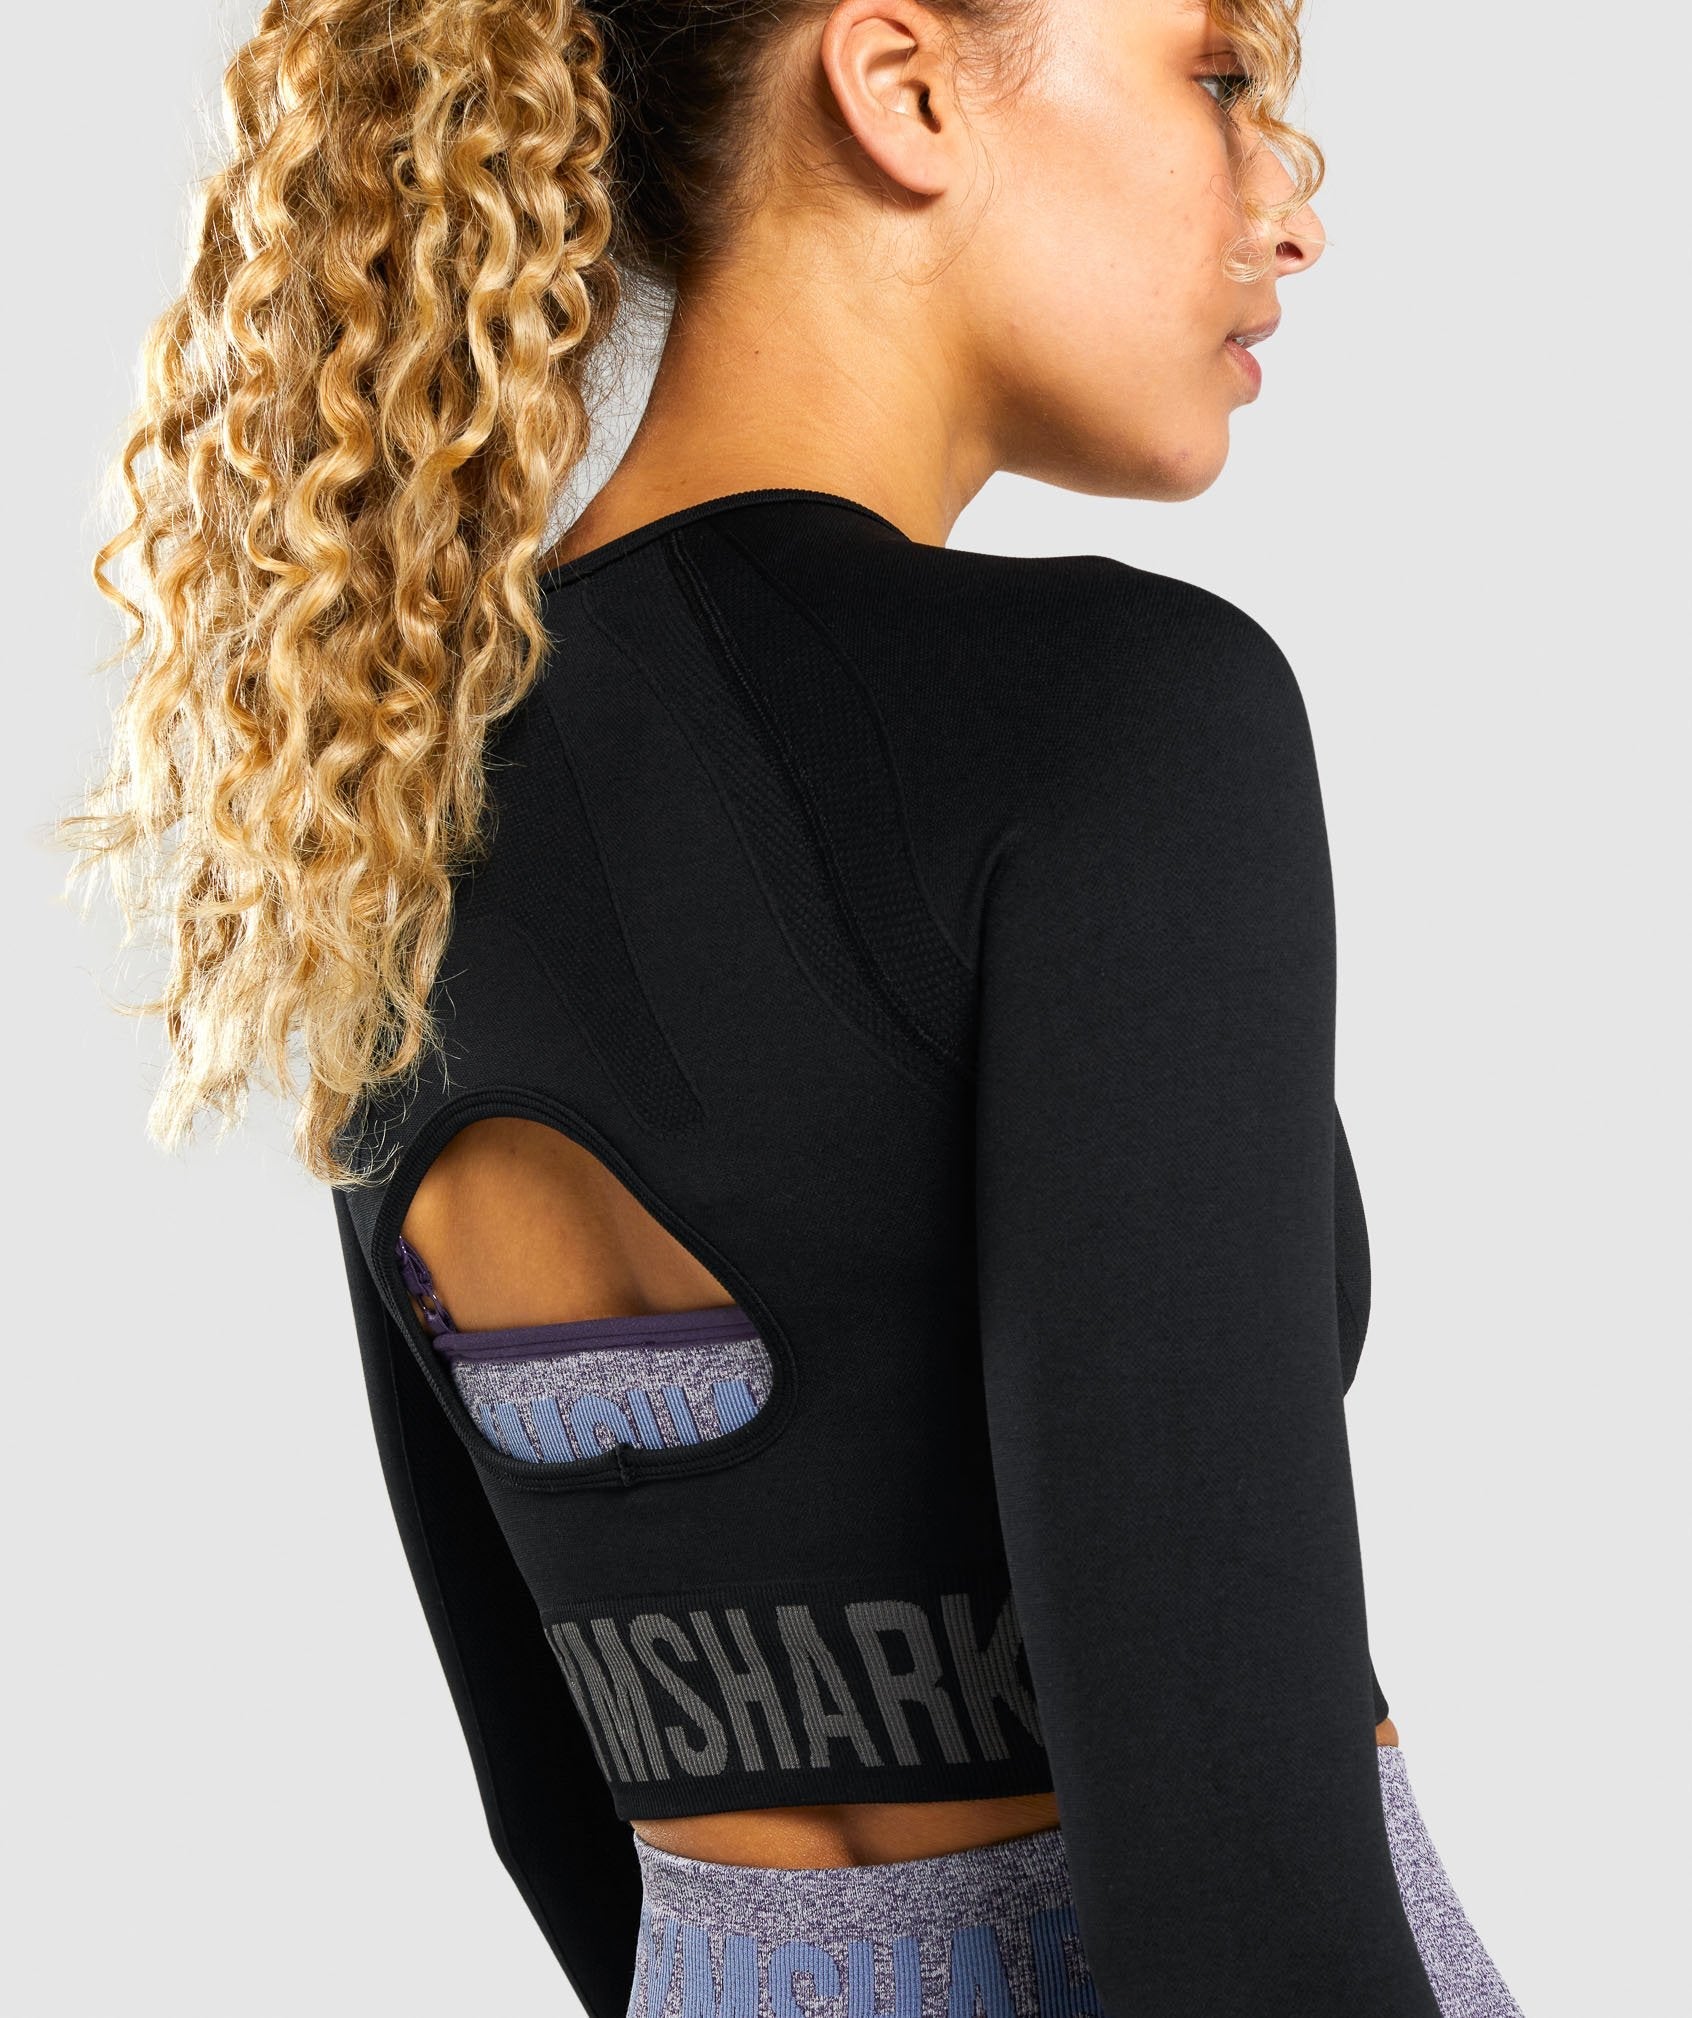 Flex Sports Long Sleeve Crop Top in Black/Charcoal - view 6